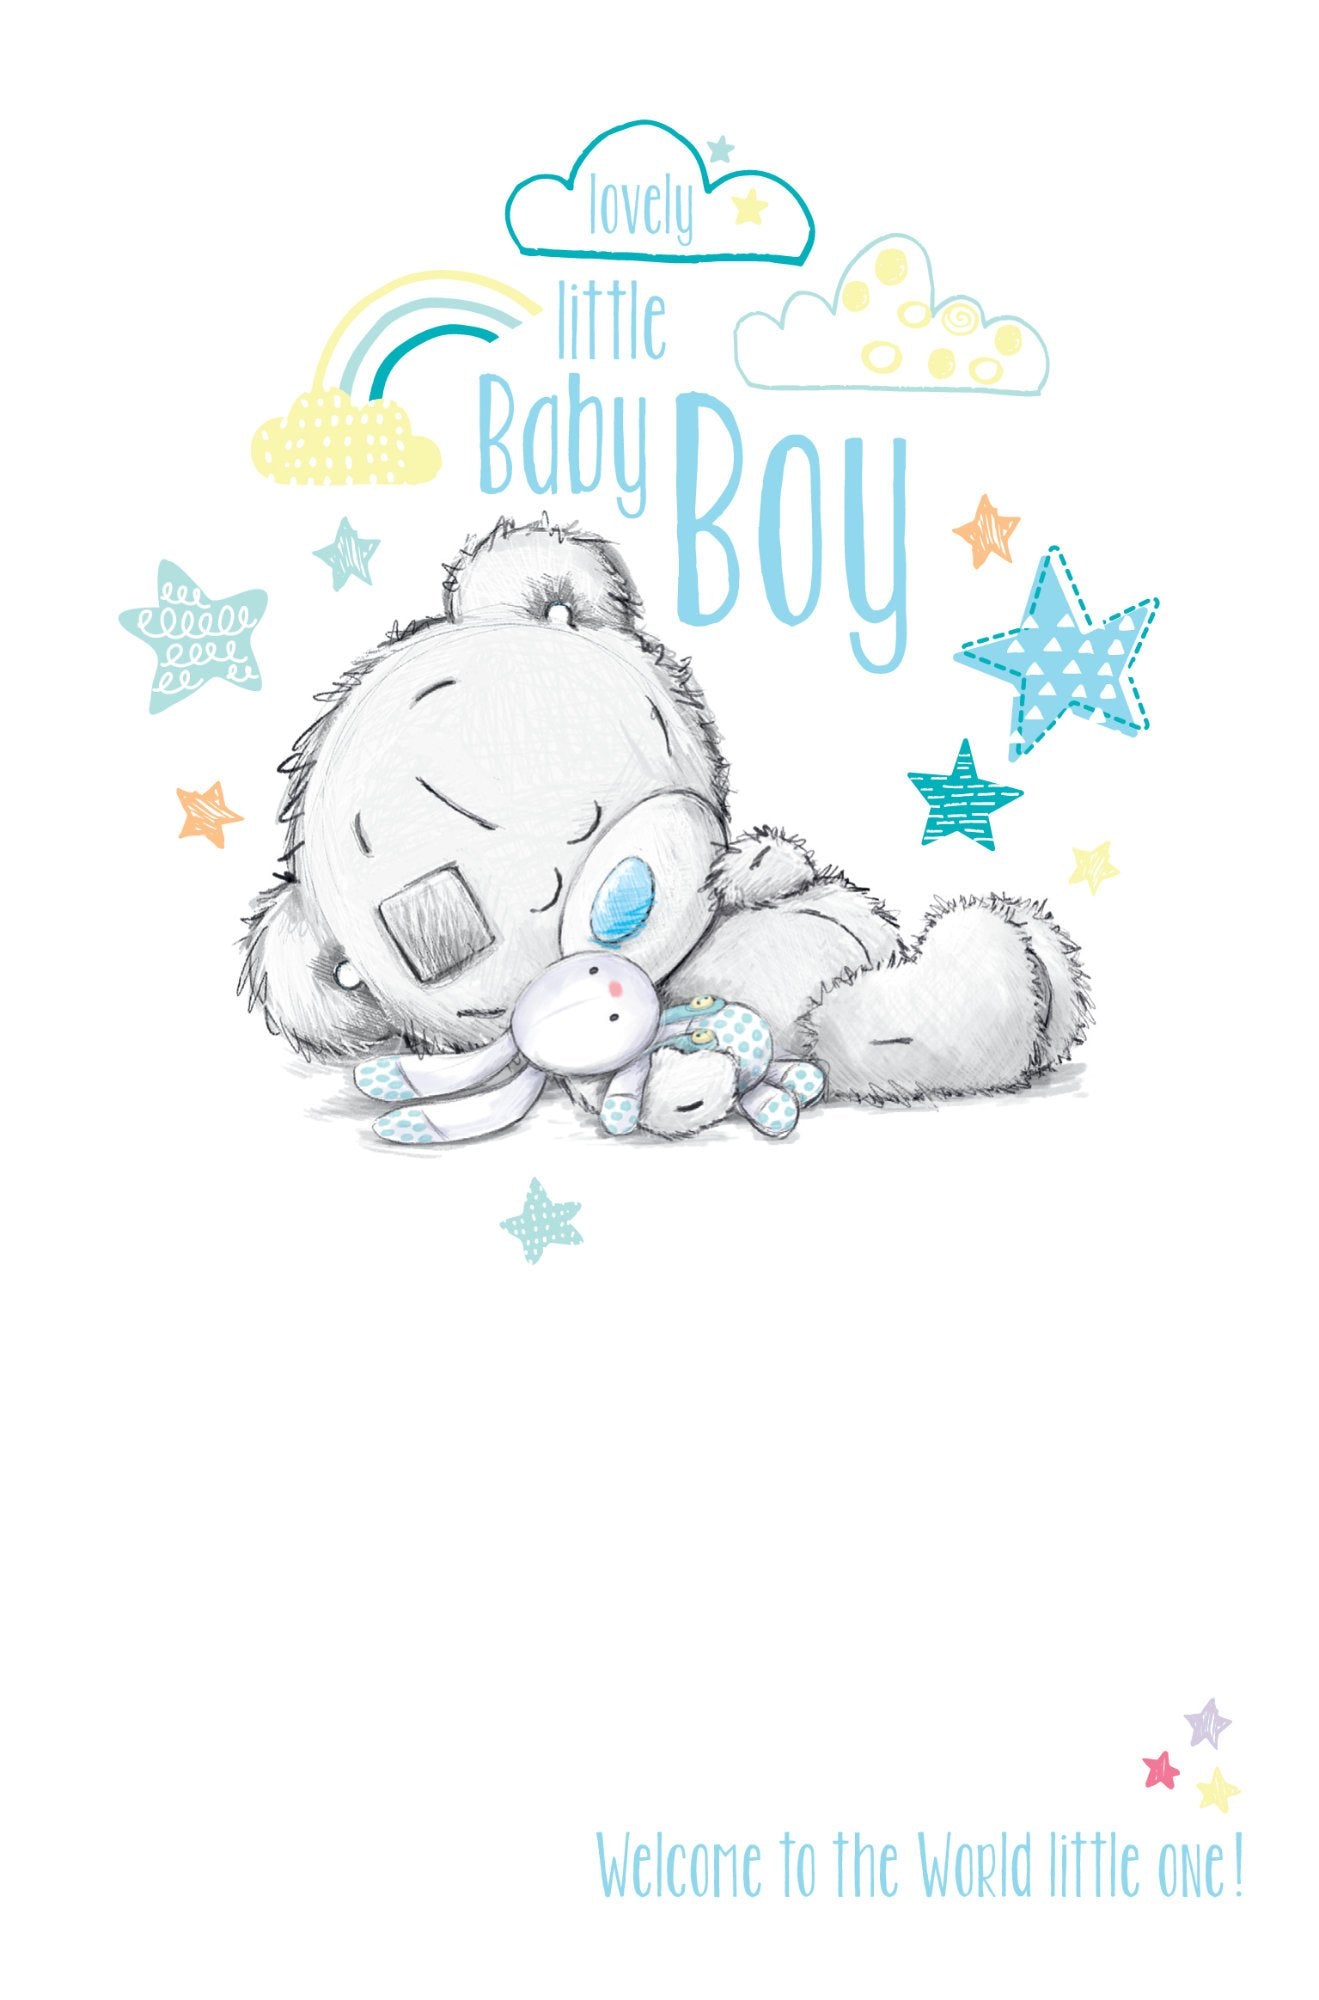 Photograph of Birth of Little Baby Boy Greetings Card at Nicole's Shop